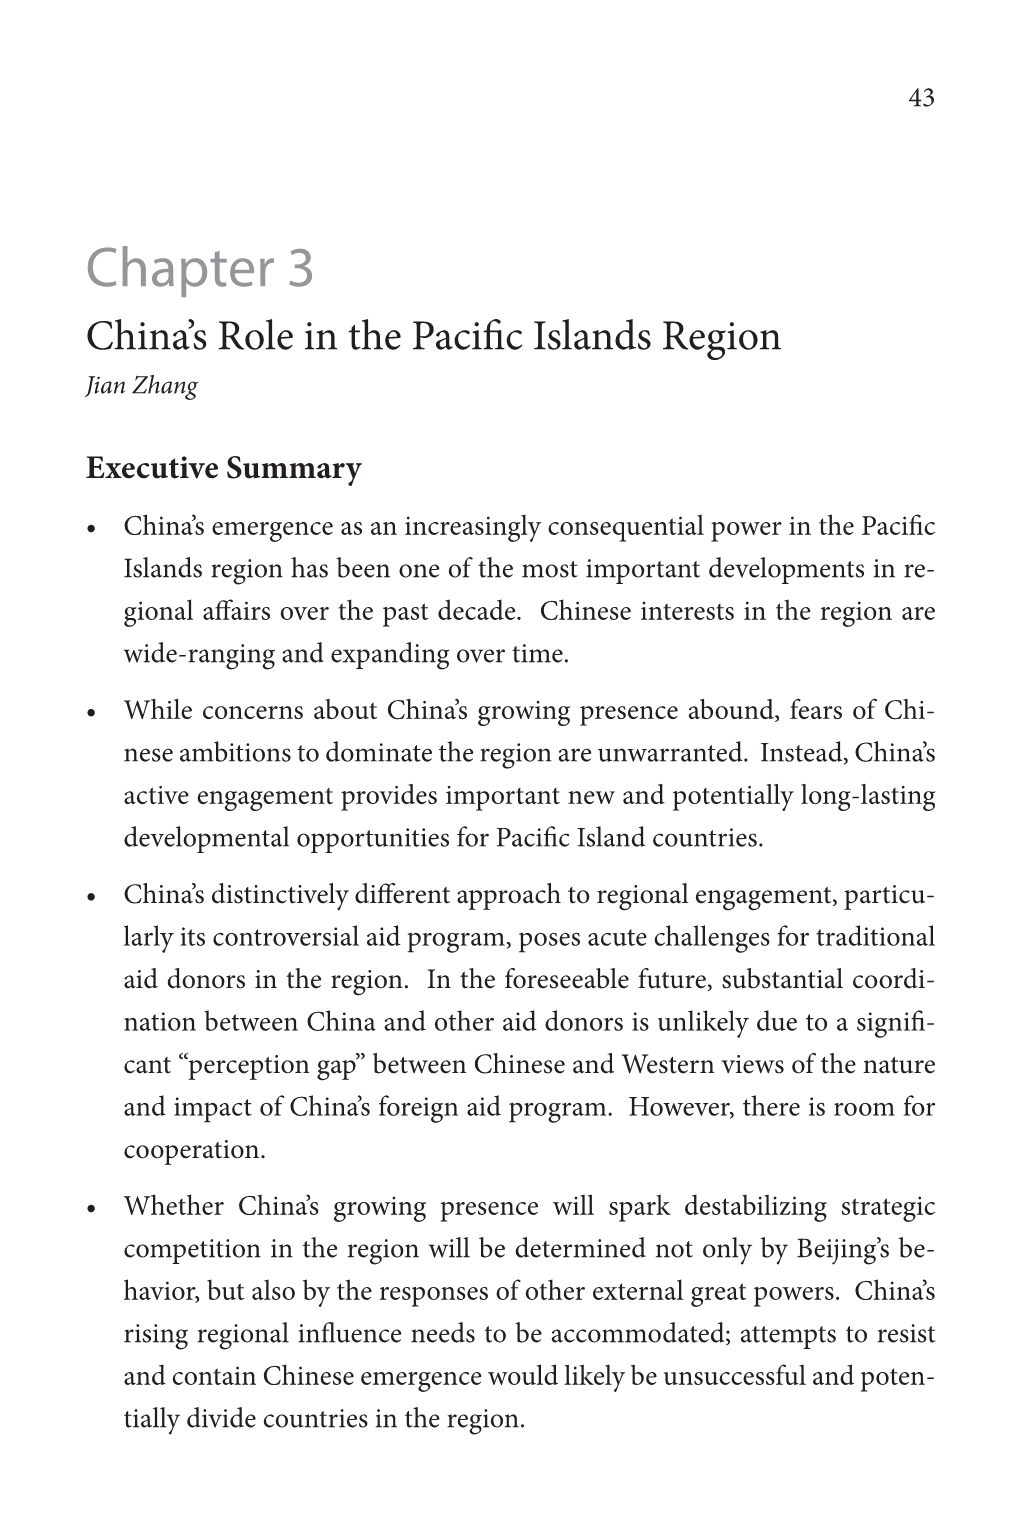 China's Role in the Pacific Islands Region